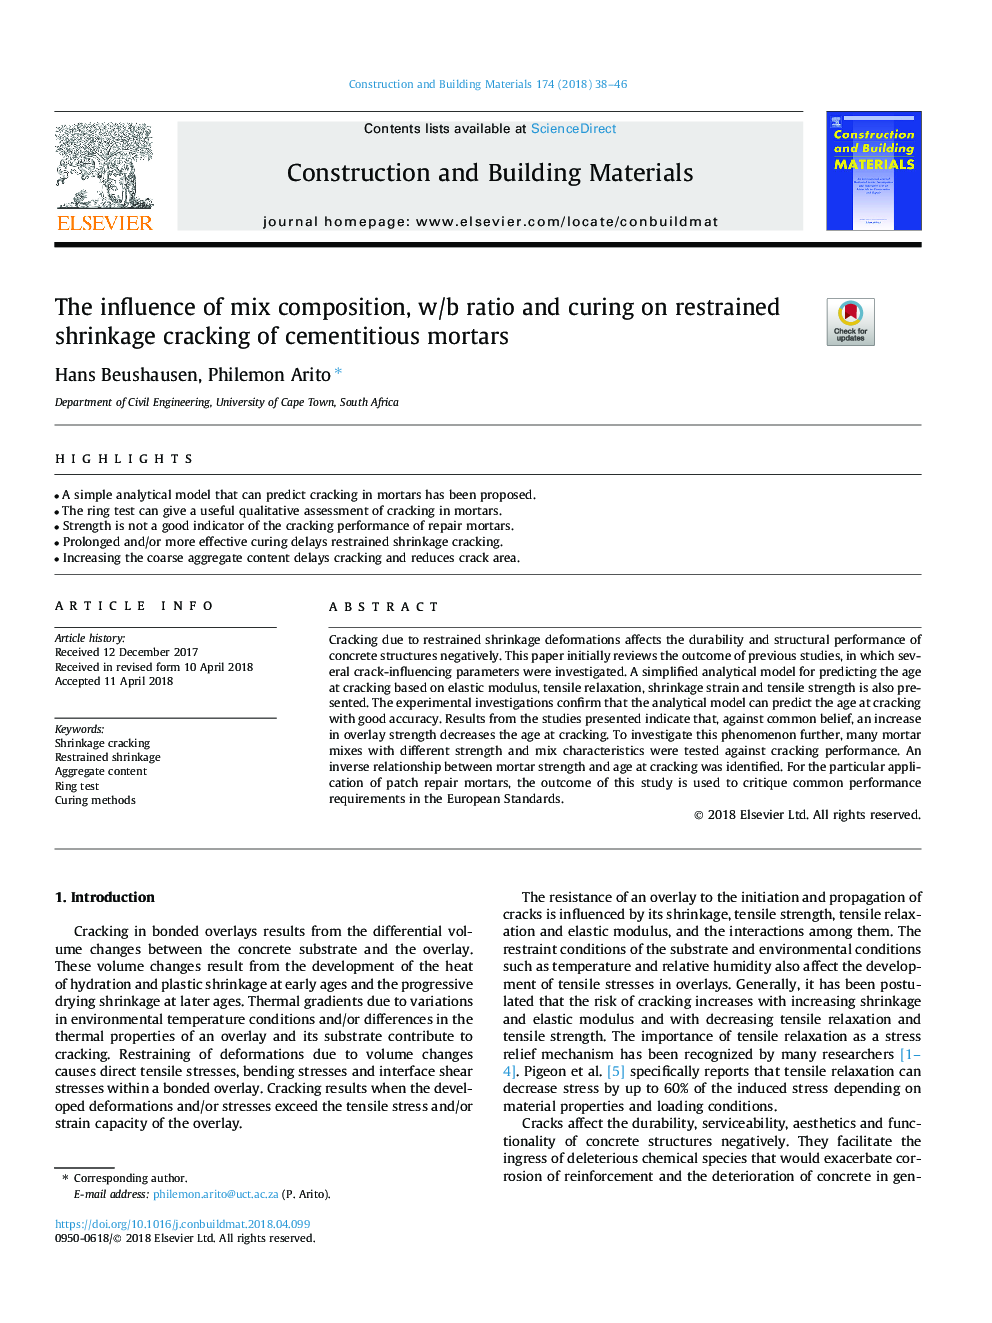 The influence of mix composition, w/b ratio and curing on restrained shrinkage cracking of cementitious mortars